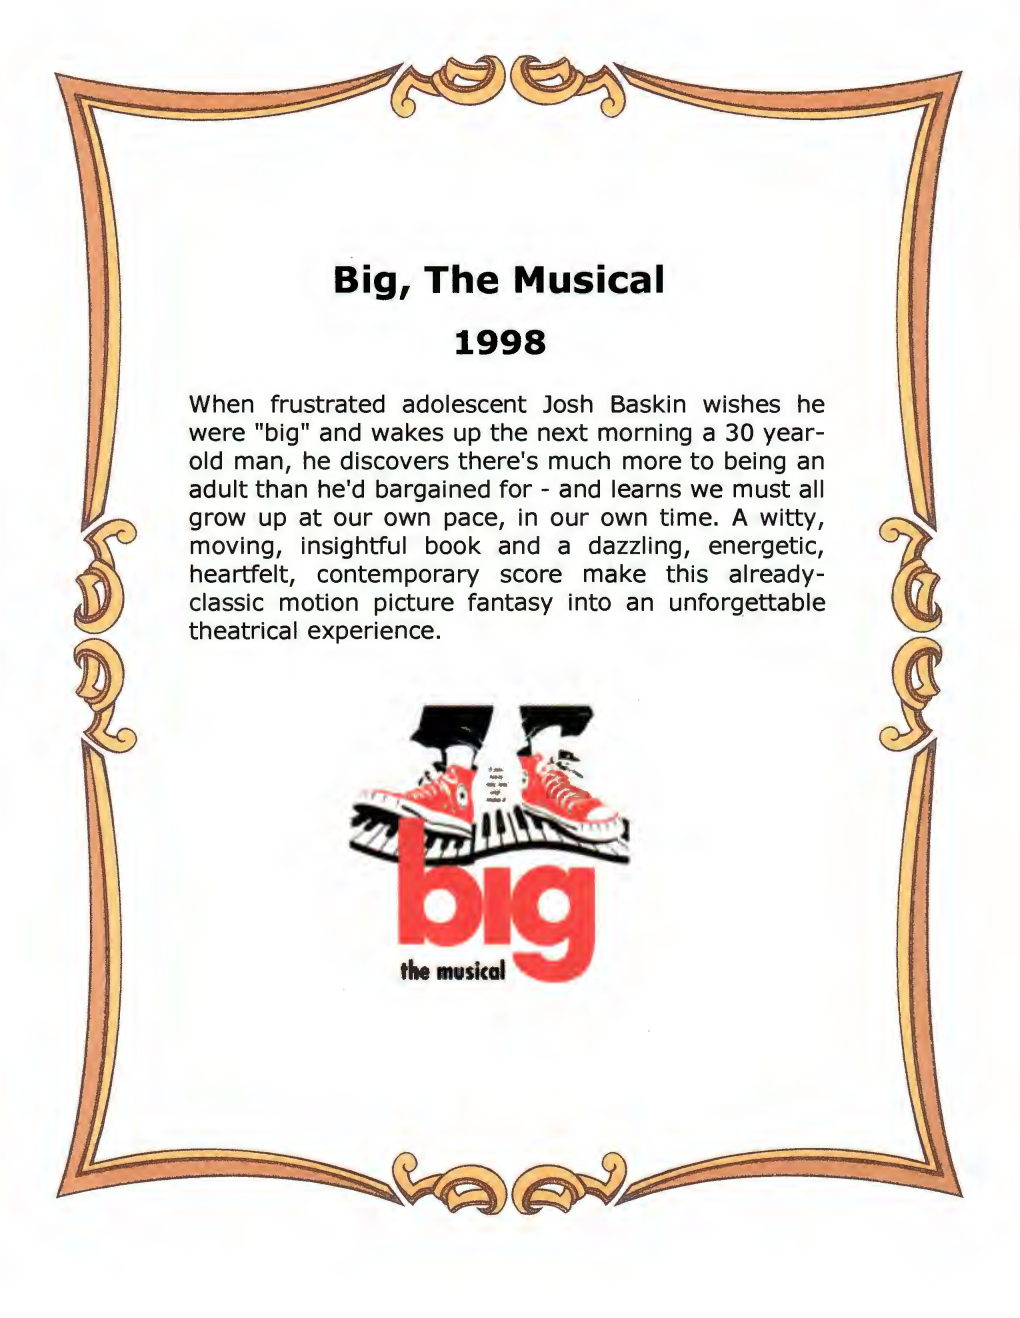 Big, the Musical 1998